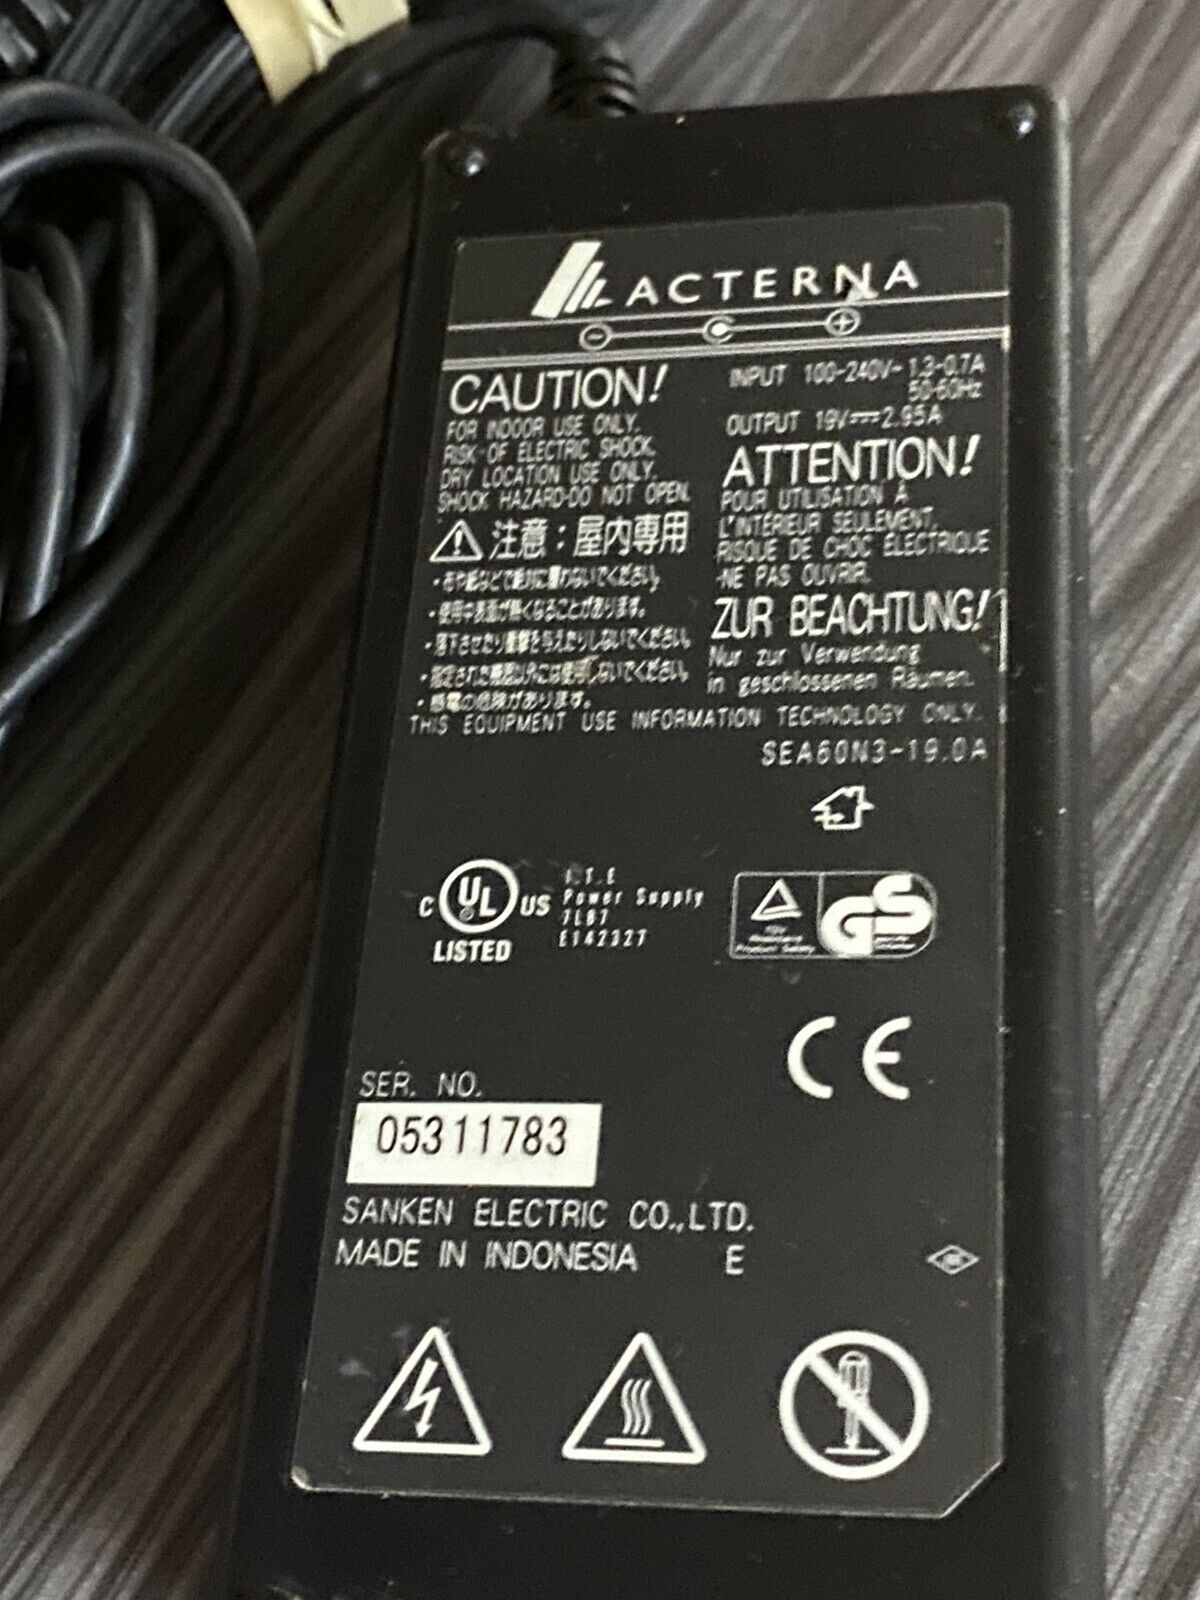 Genuine JDSU SEA60N3-19A Acterna AC Adapter Charger 19V 2.95A w/P.Cord OEM MPN: Does not apply Voltage: 19 V Comp